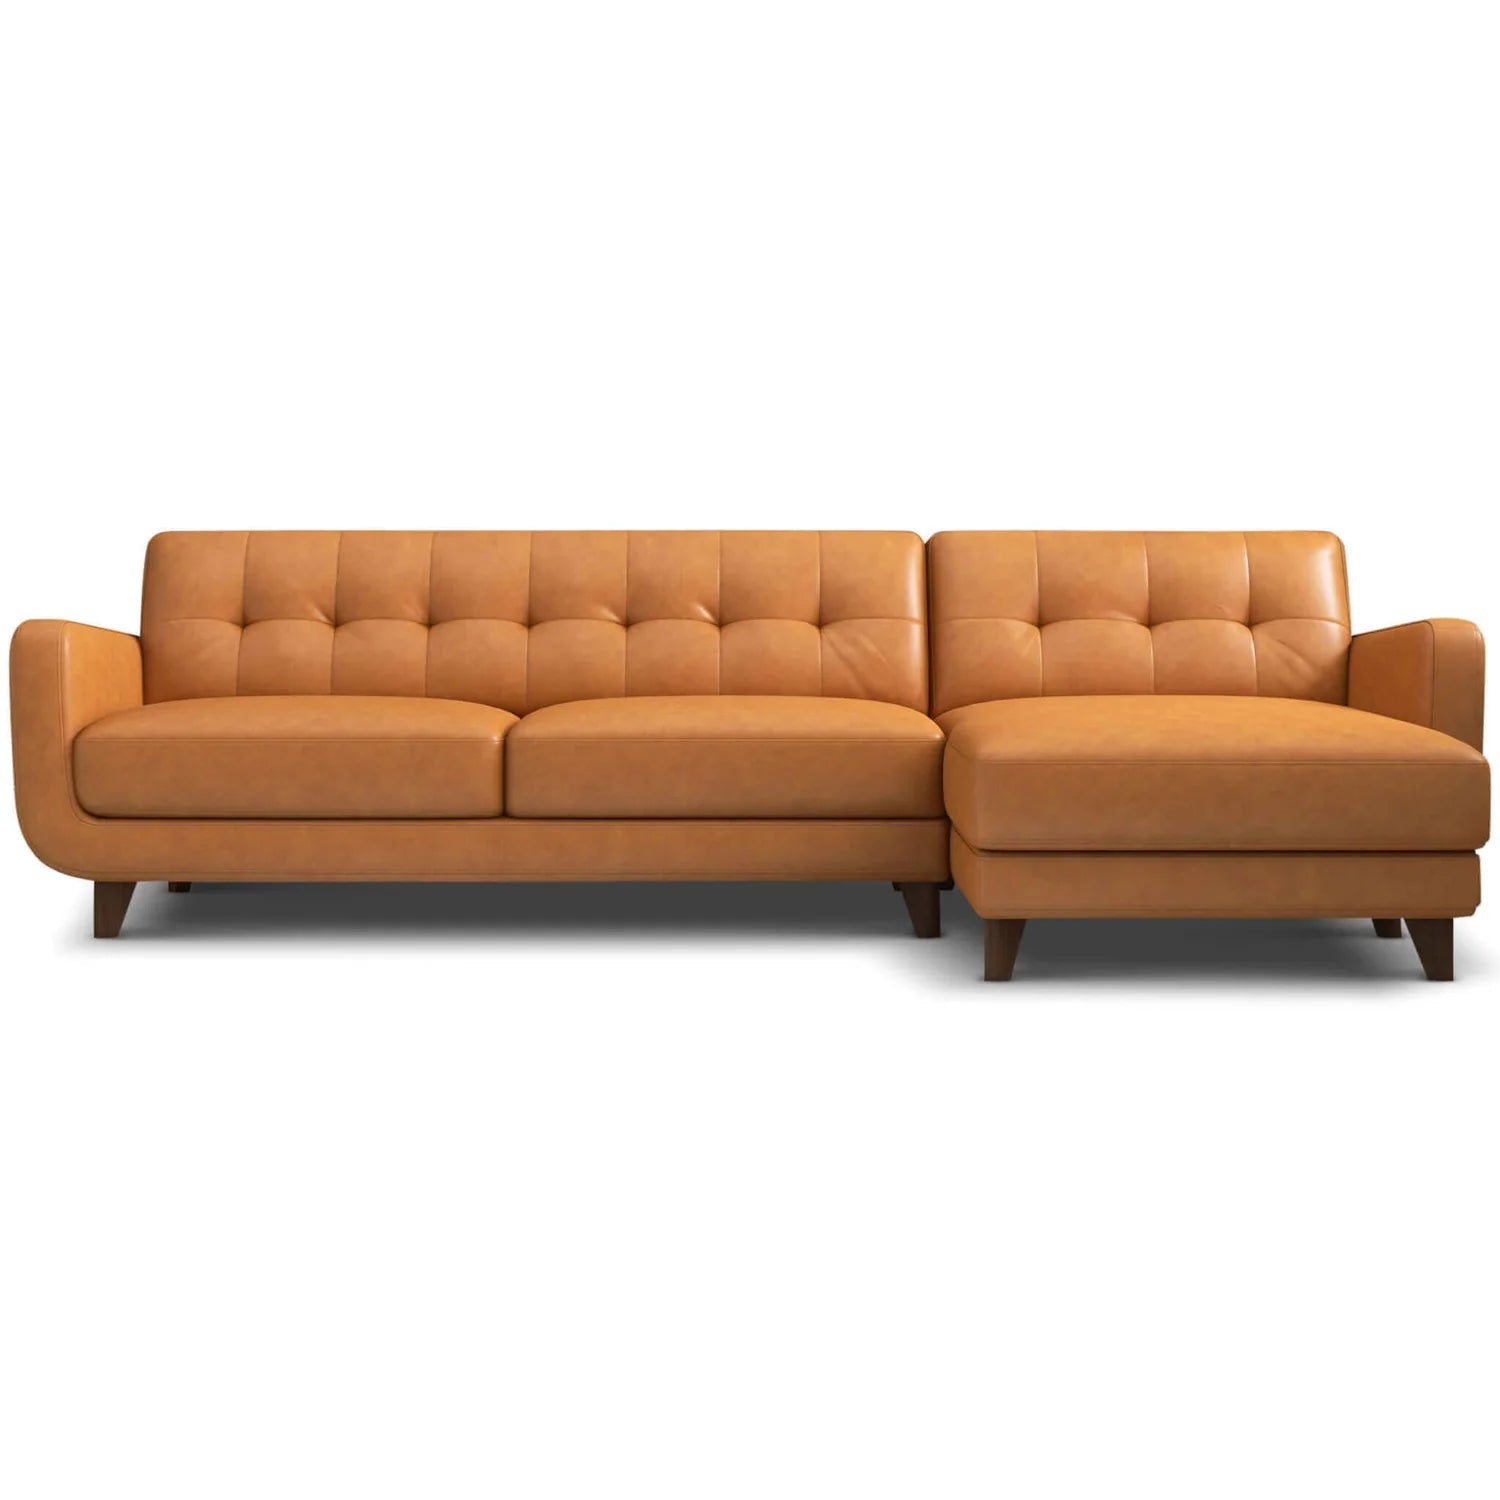 Allison Tan Leather Sectional Sofa Right Facing